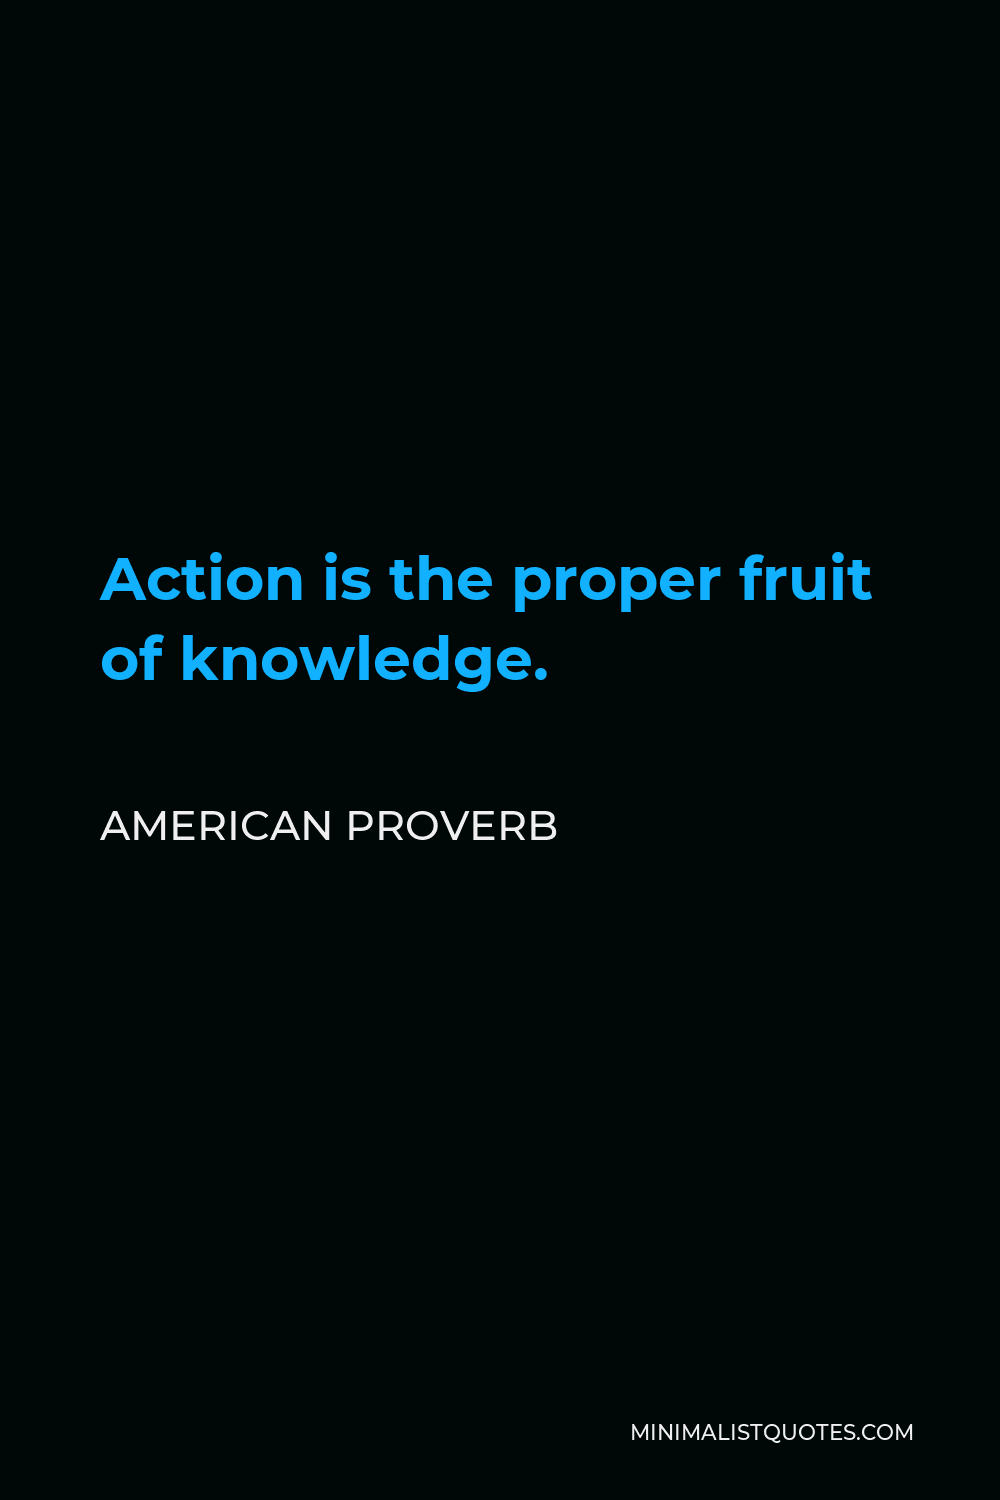 American Proverb Quote - Action is the proper fruit of knowledge.